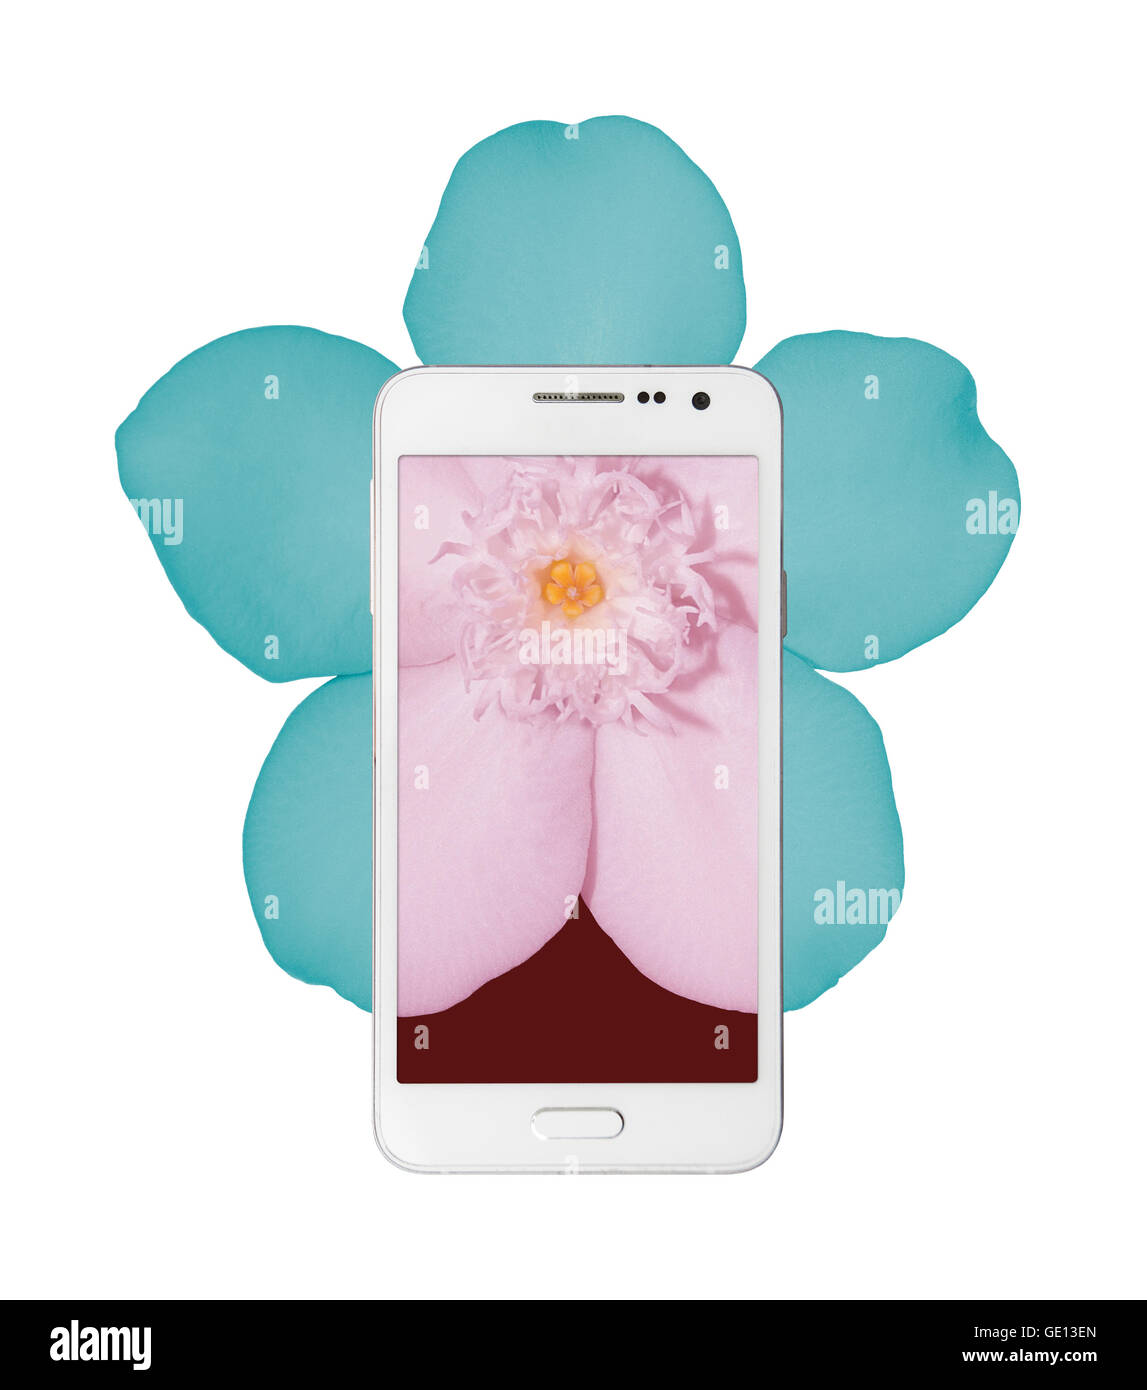 a portion of a flower on a smart phone screen and it's remaining parts extend outside the phone in a different color. Stock Photo